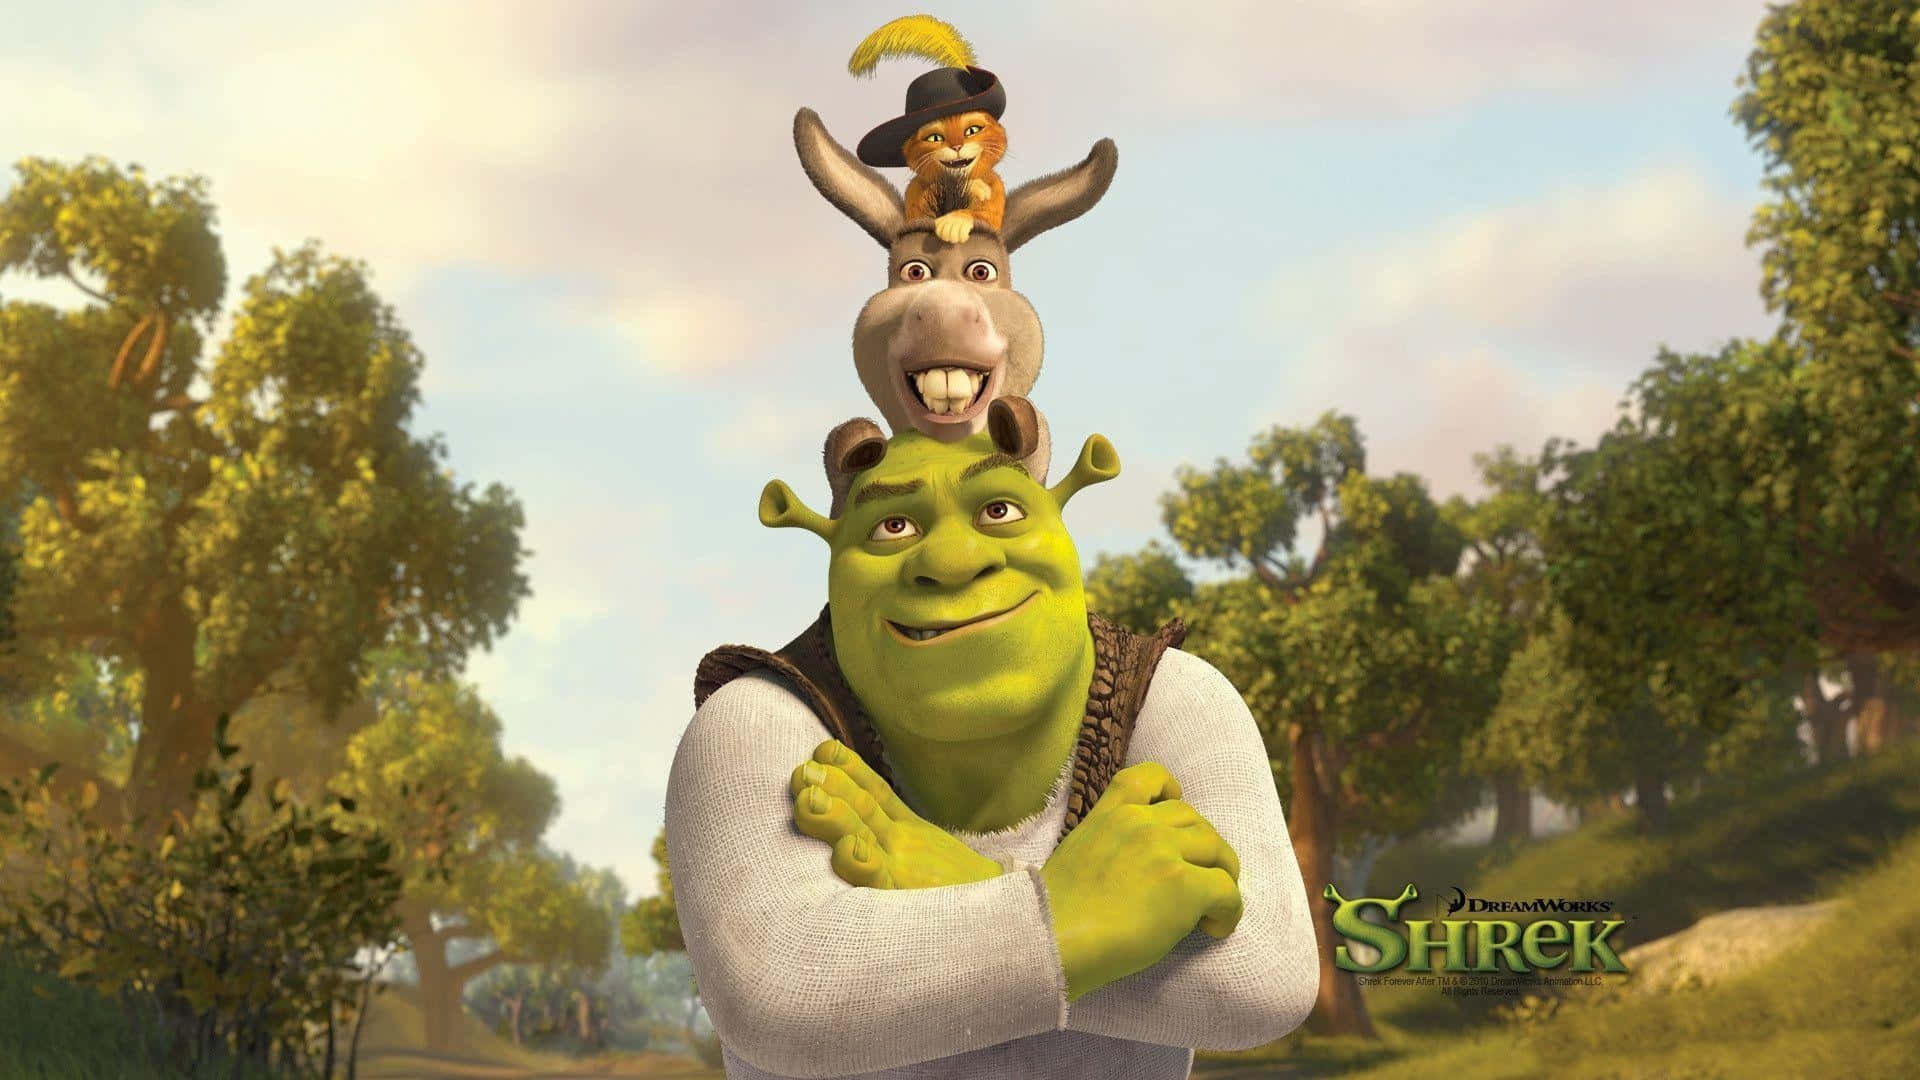 Shrek is funny, even when things aren't going as planned